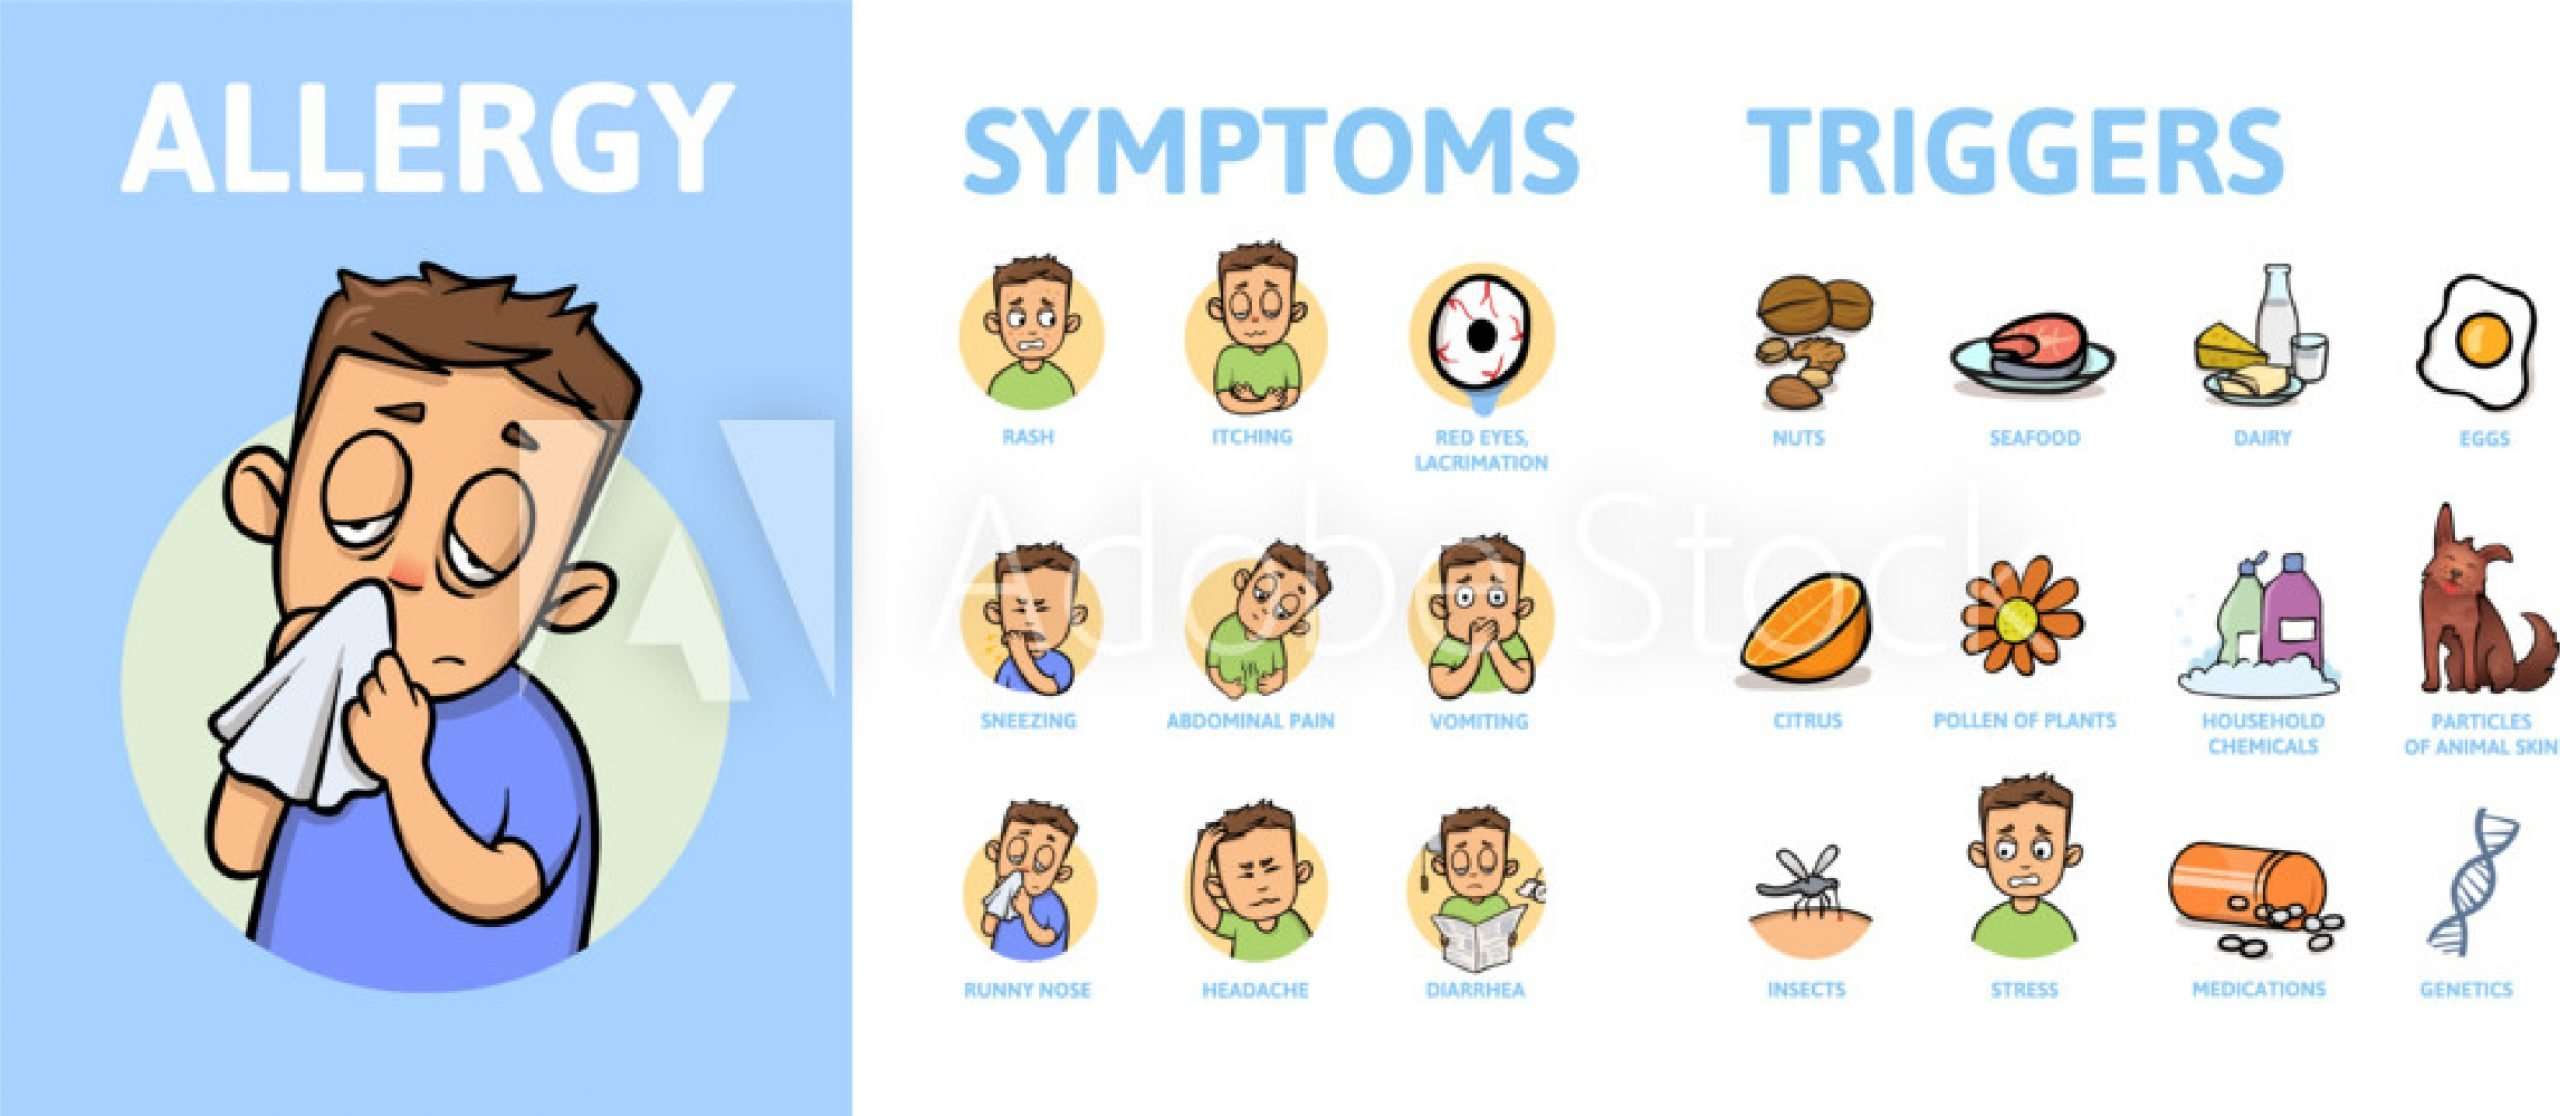 THE MOST COMMON SYMPTOMS OF FOOD ALLERGY